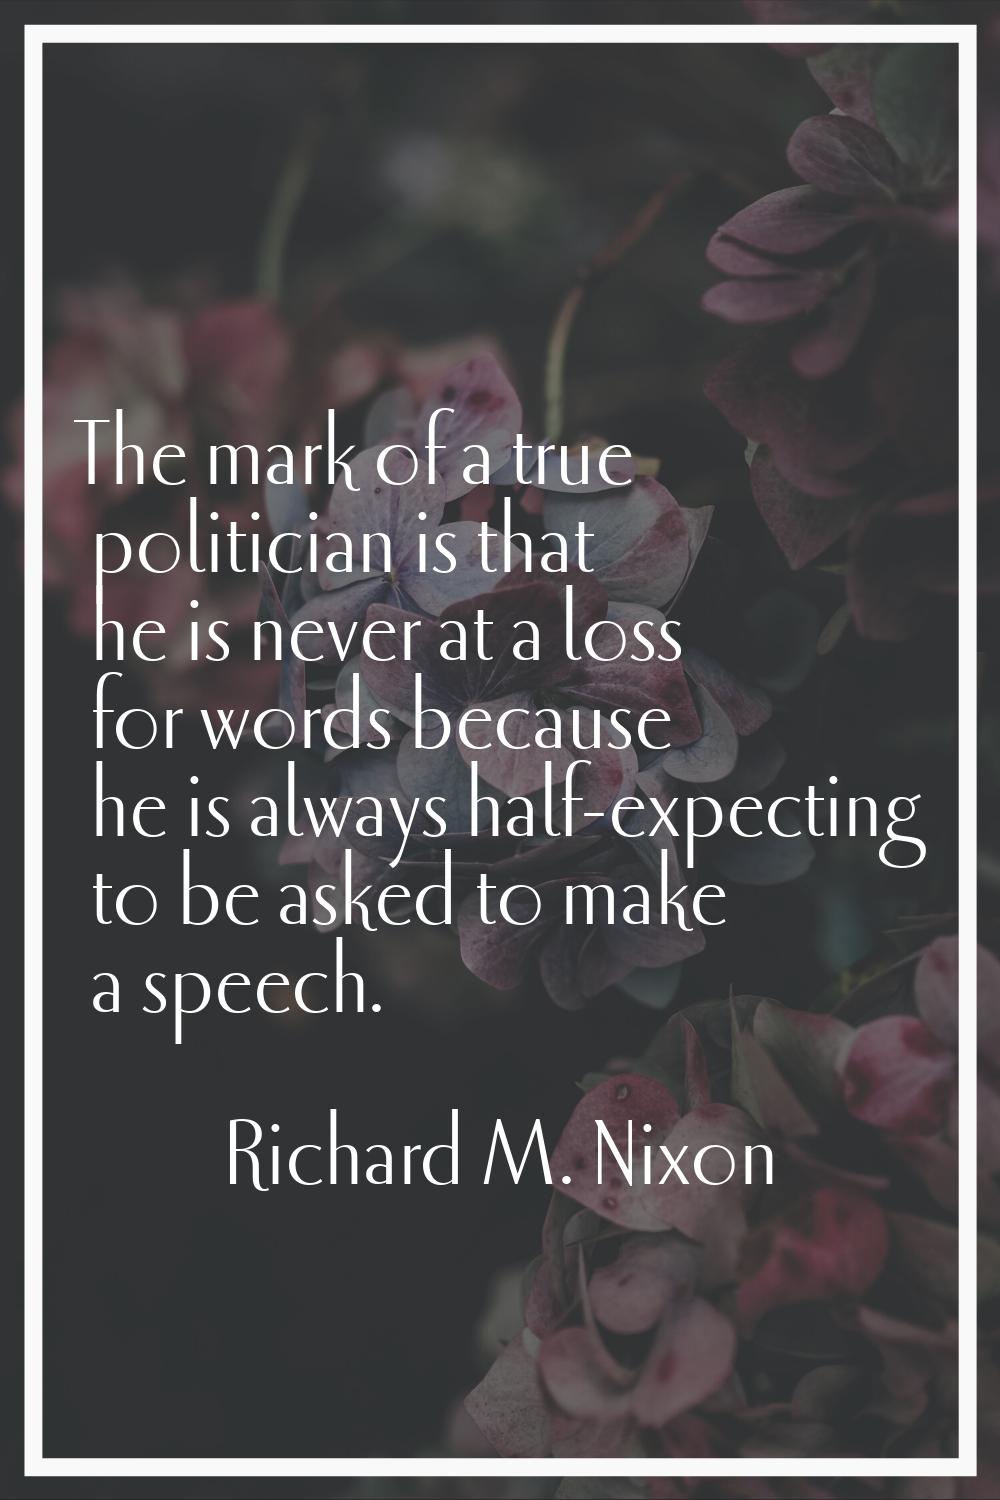 The mark of a true politician is that he is never at a loss for words because he is always half-exp